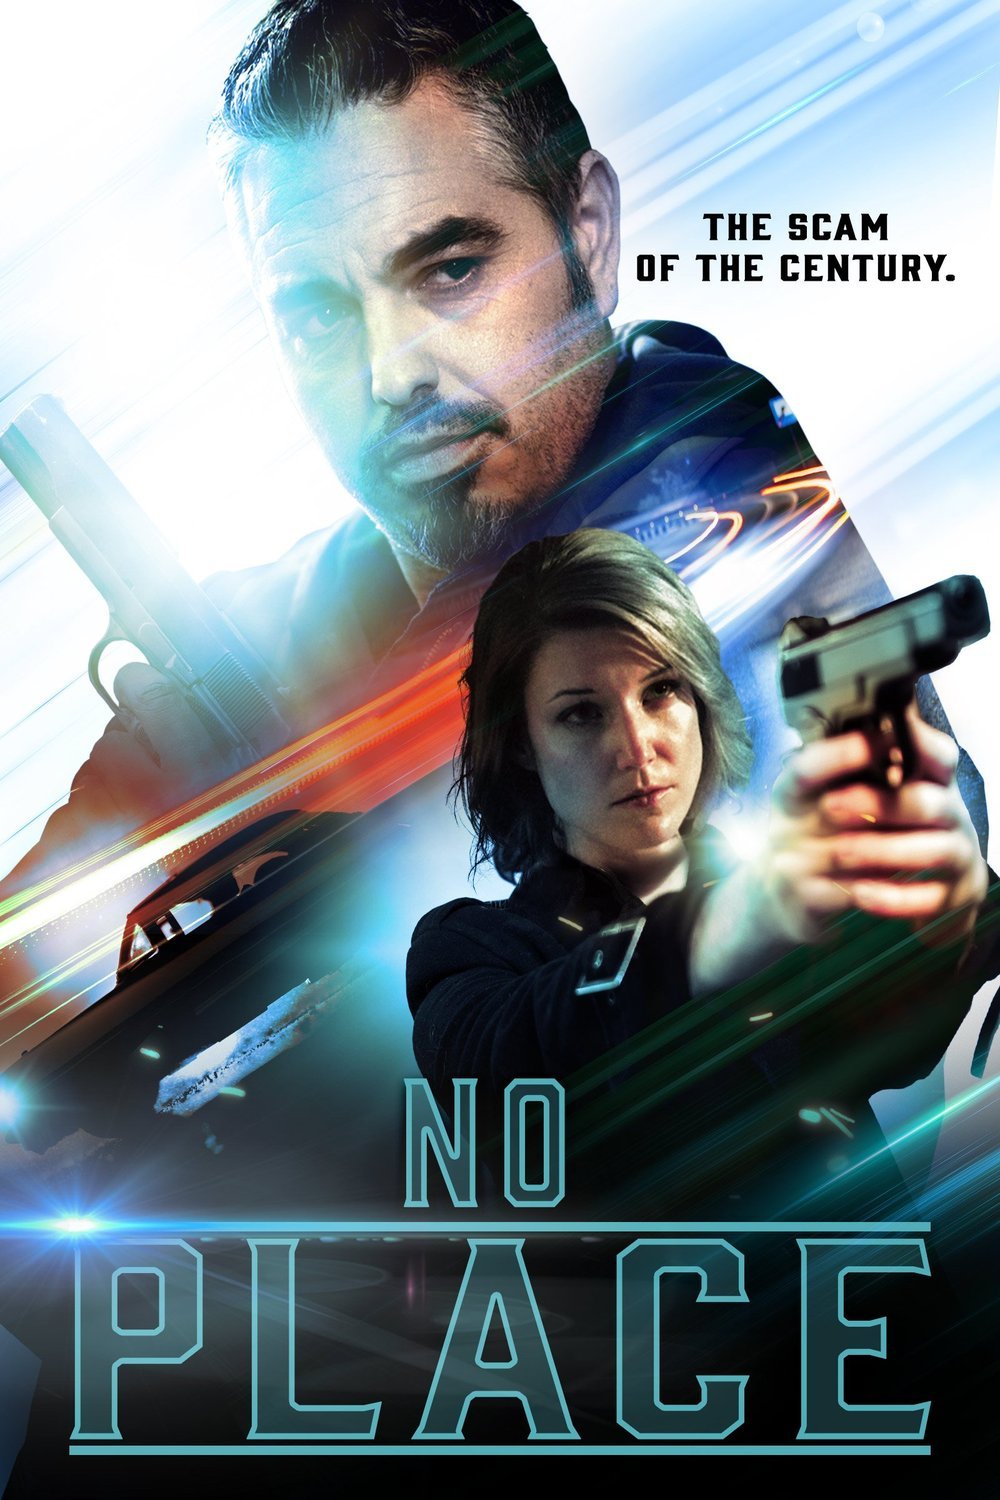 Poster of the movie No Place